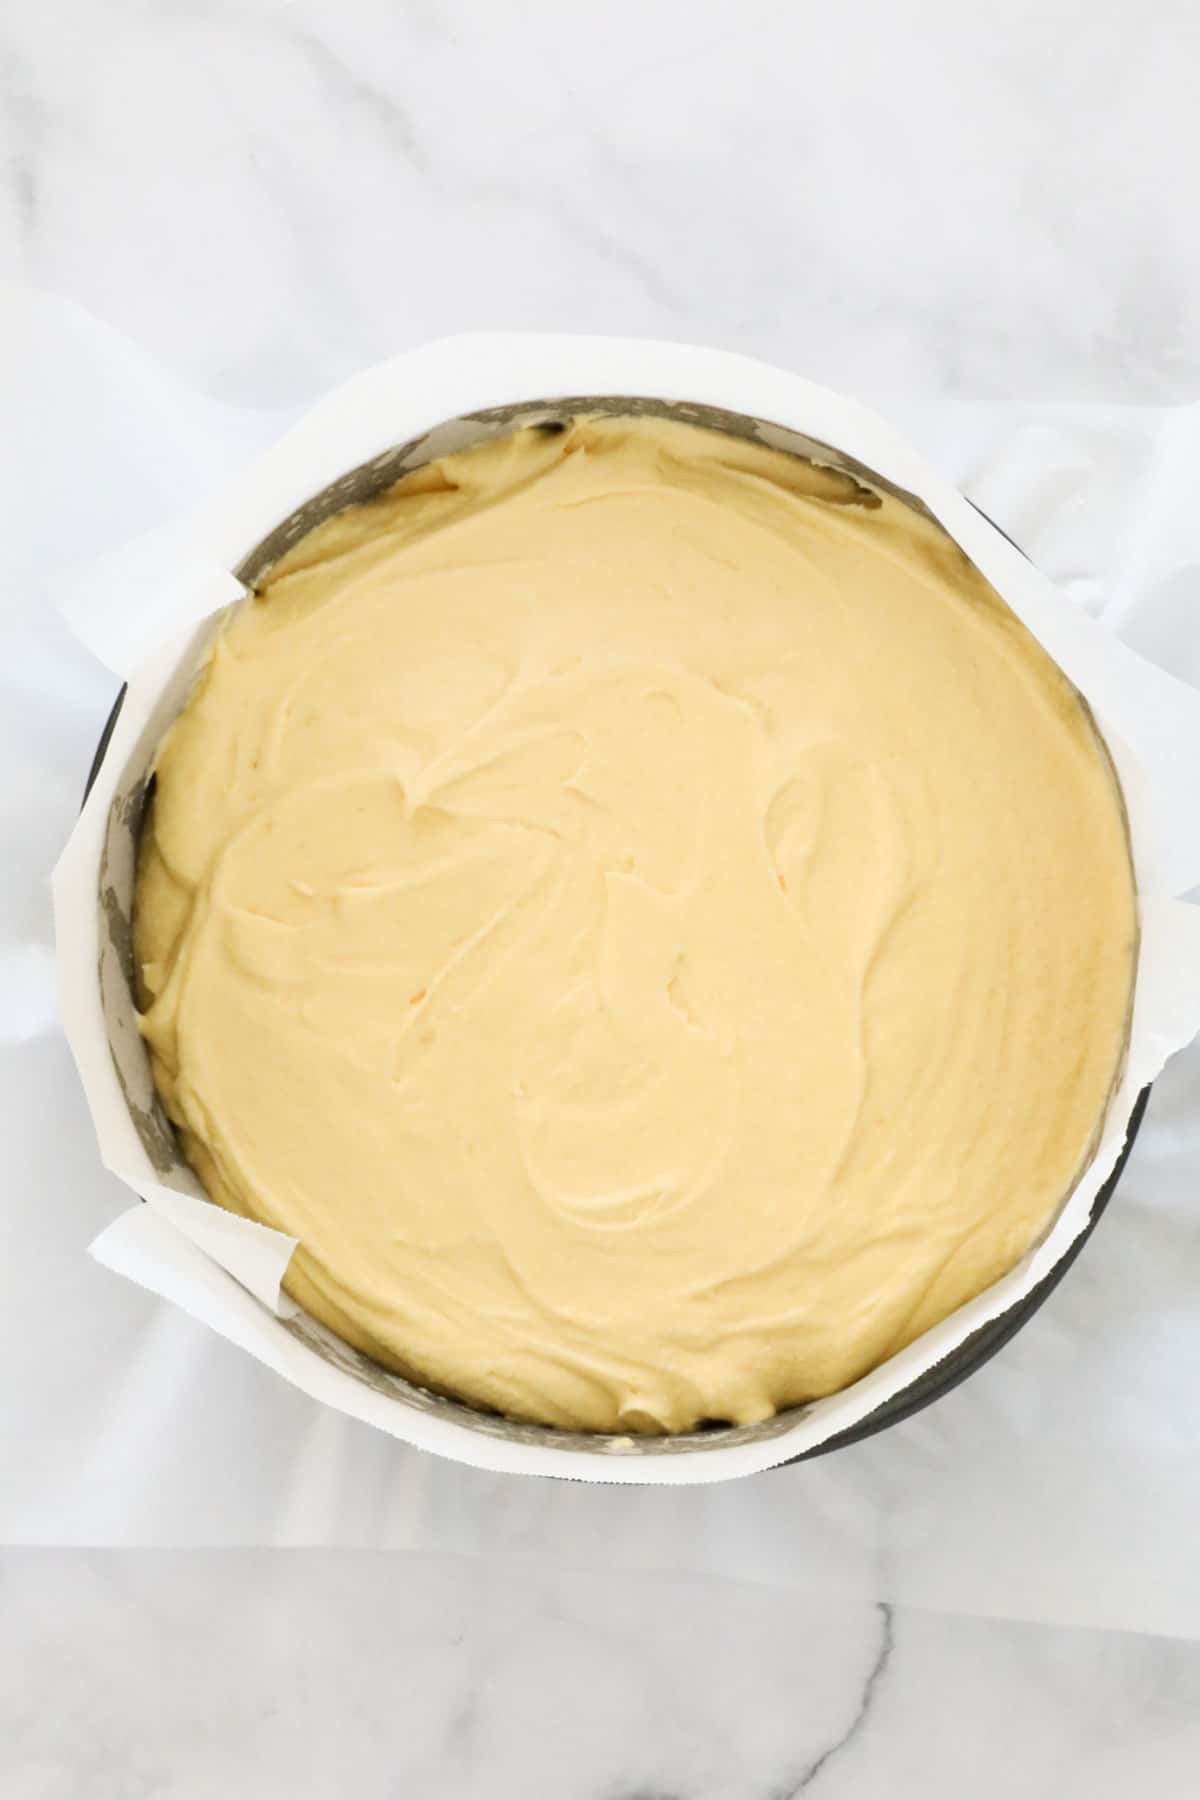 Batter poured into a round baking tin lined with baking paper.